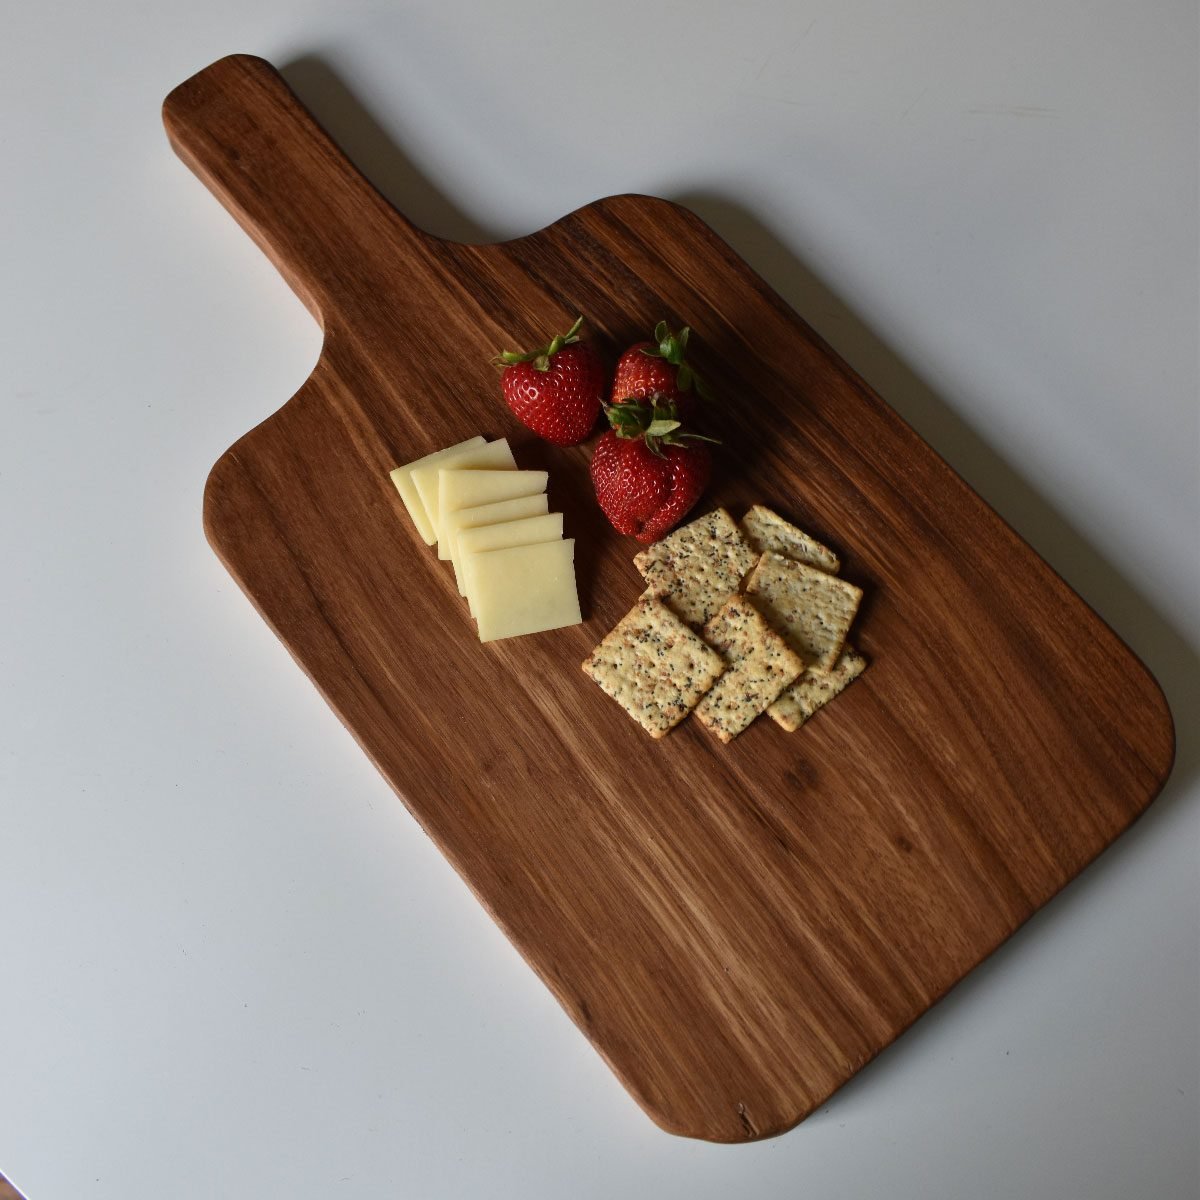 How to Make a Charcuterie Board: Templates, Wood Selection, Finish